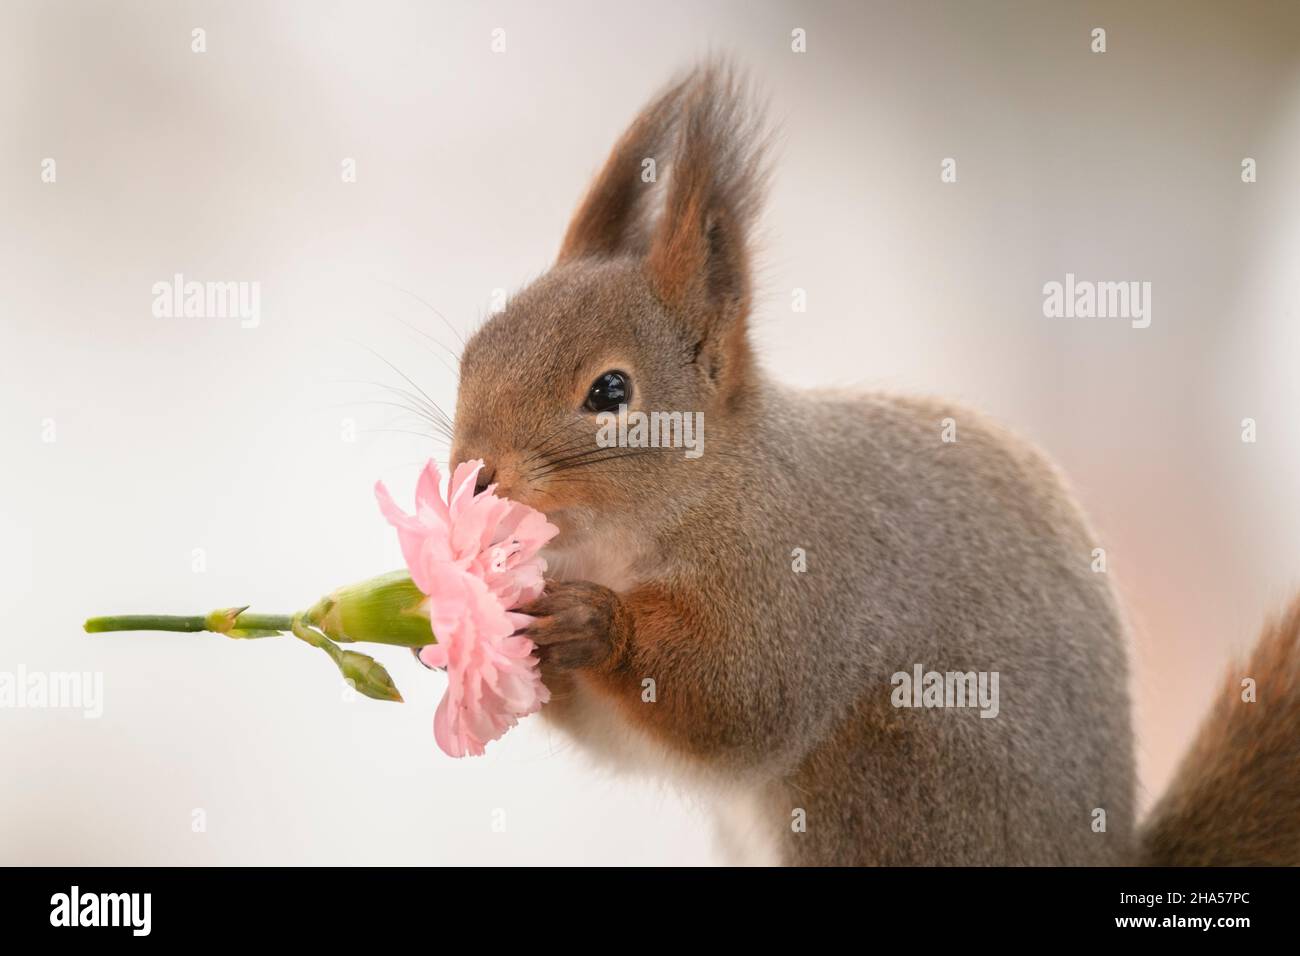 red squirrel is holding a dianthus flower Stock Photo